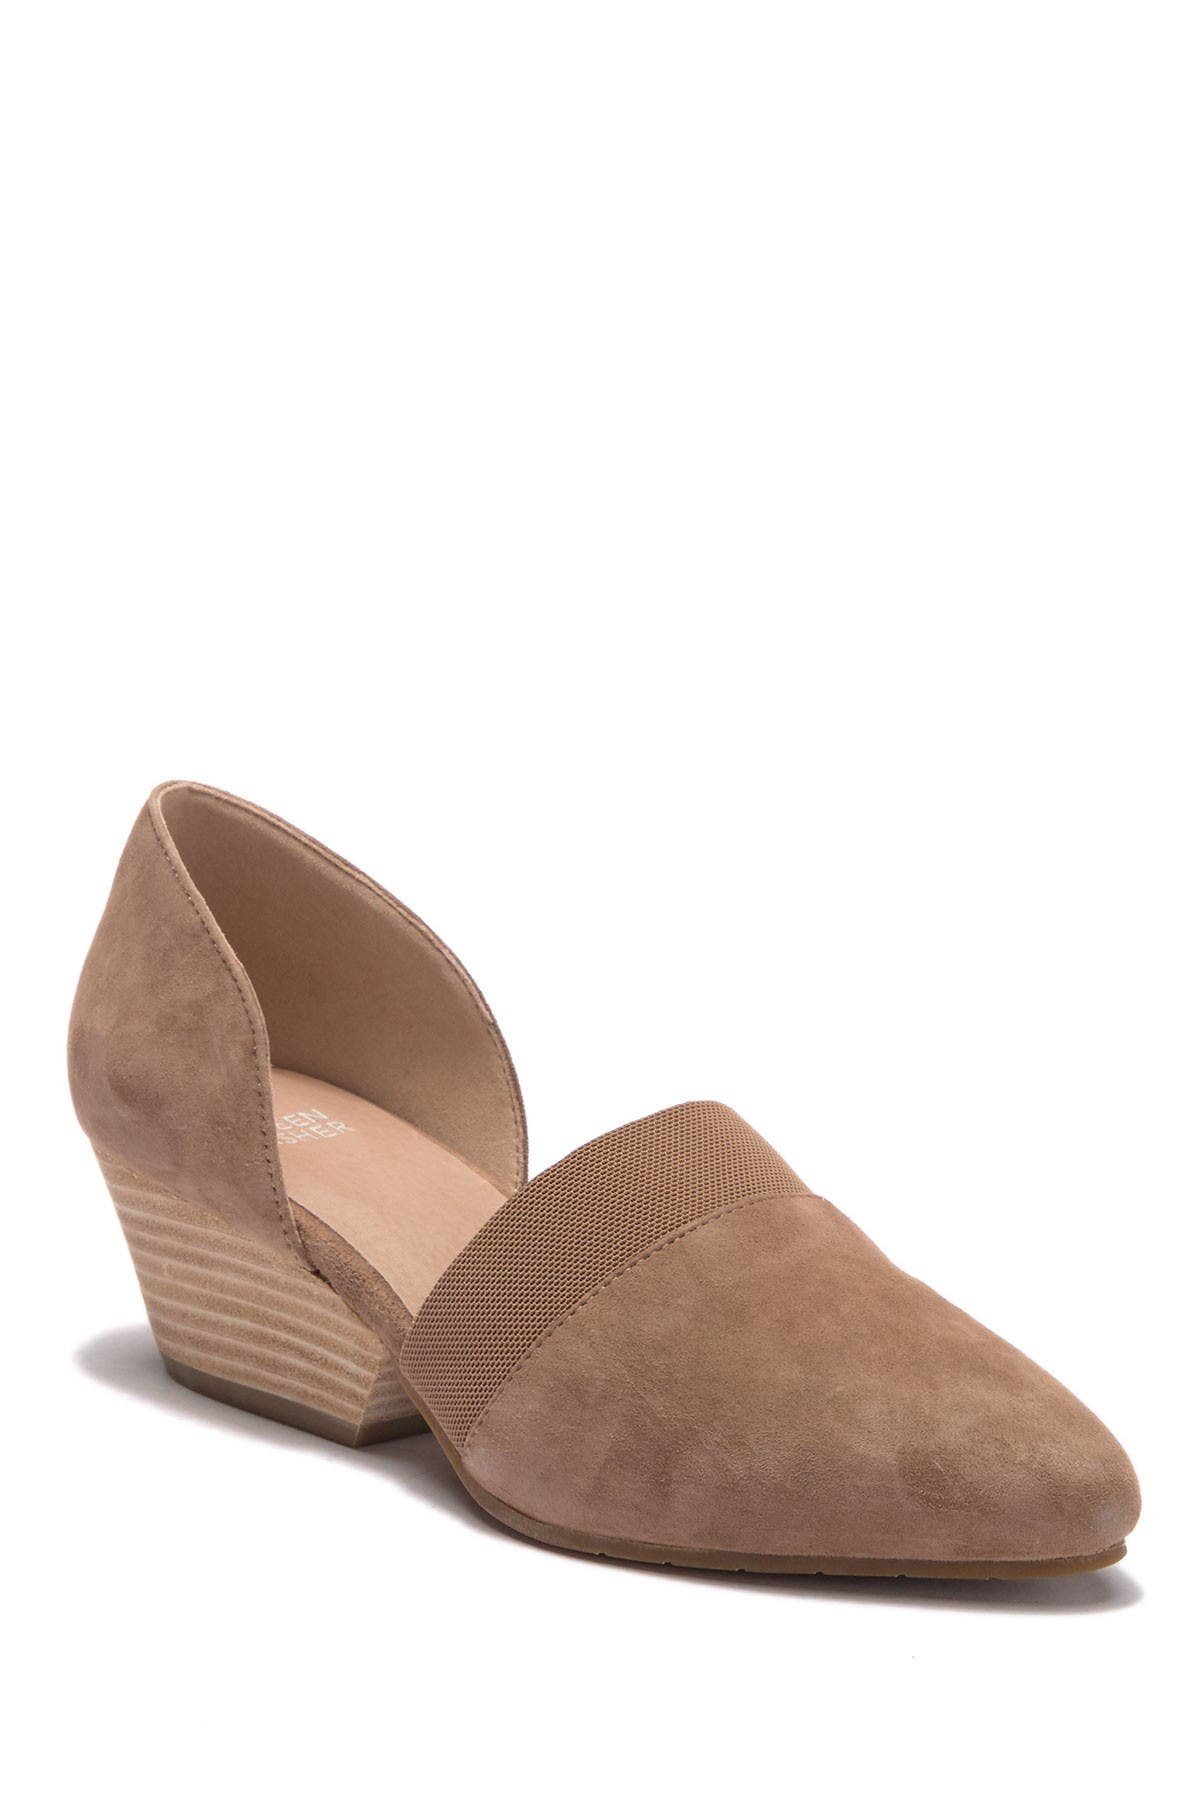 Eileen Fisher | Hilly d'Orsay Pump 